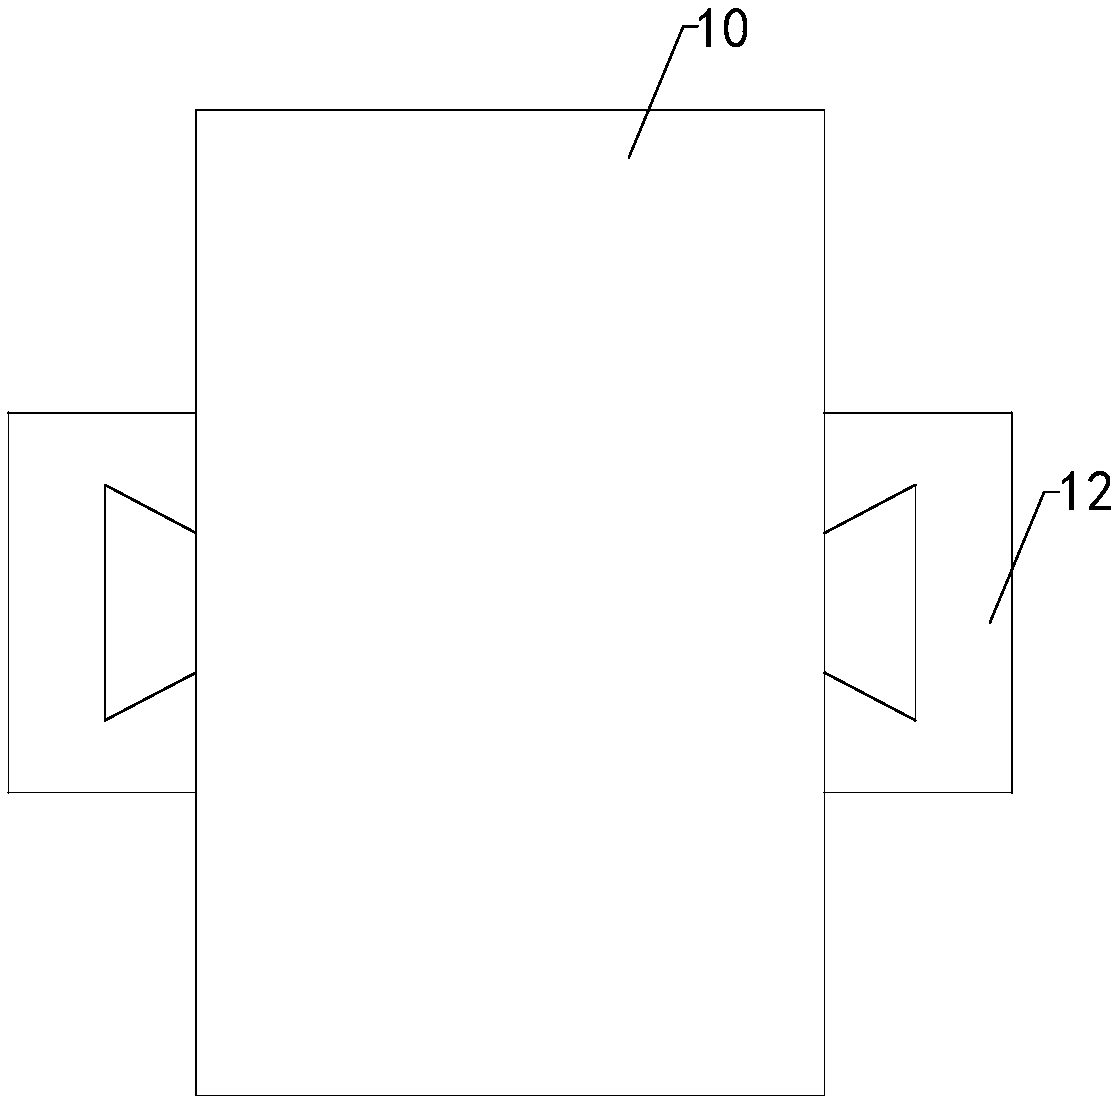 A surface treatment apparatus for that production of flexible circuit board